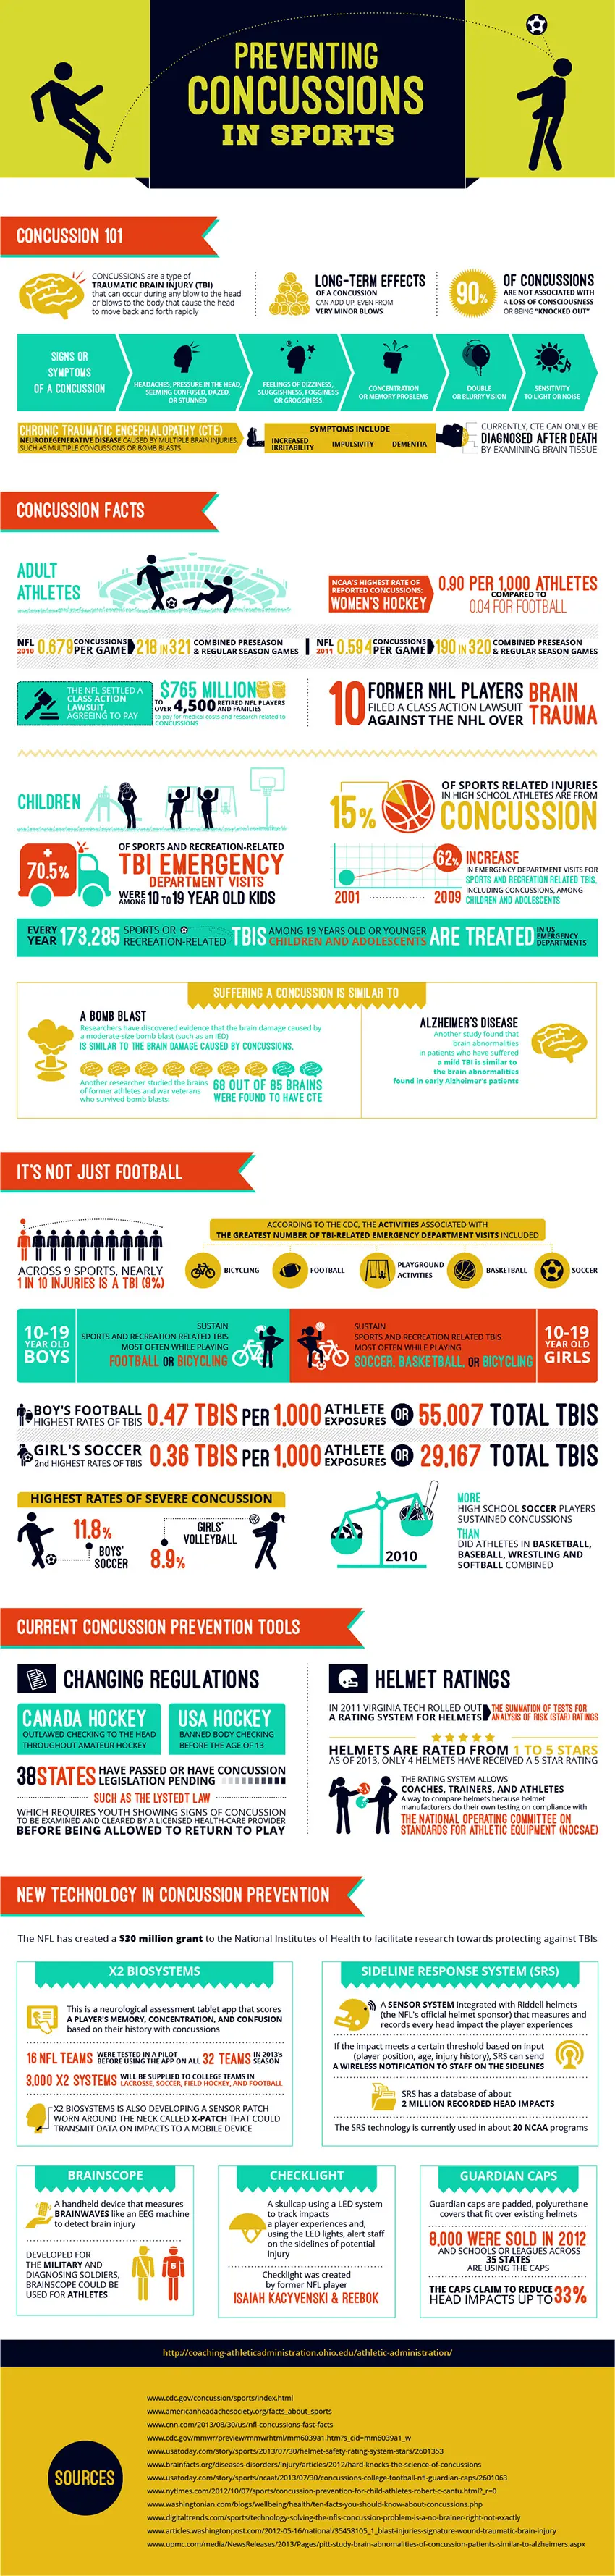 Featured image: Preventing Concussions in Youth Sports